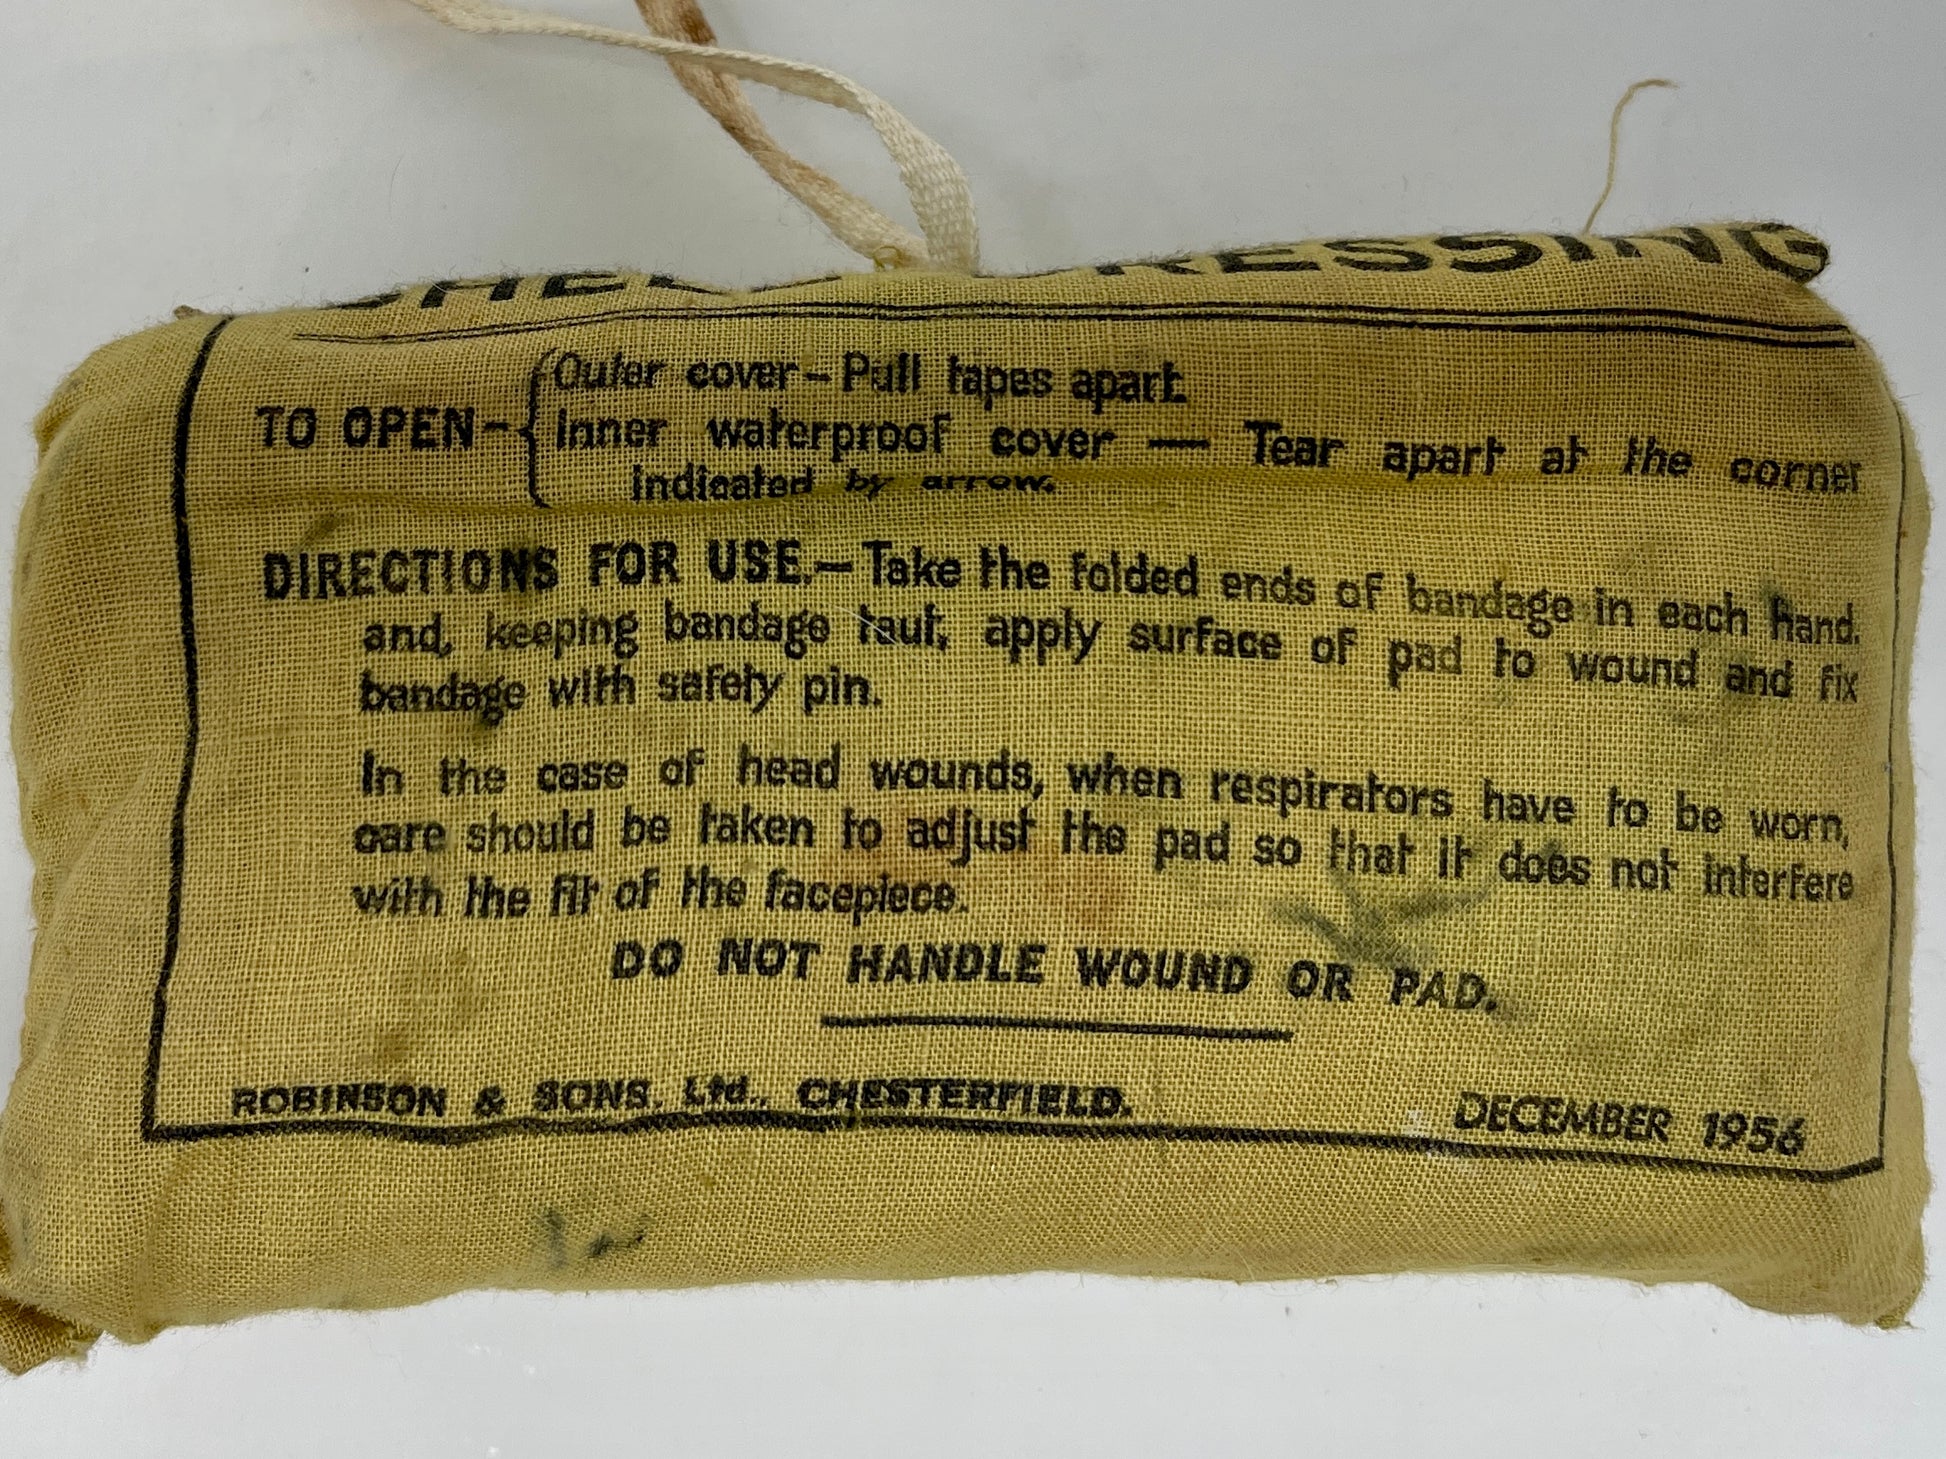 British Army issue Shell Dressing dated 1956.